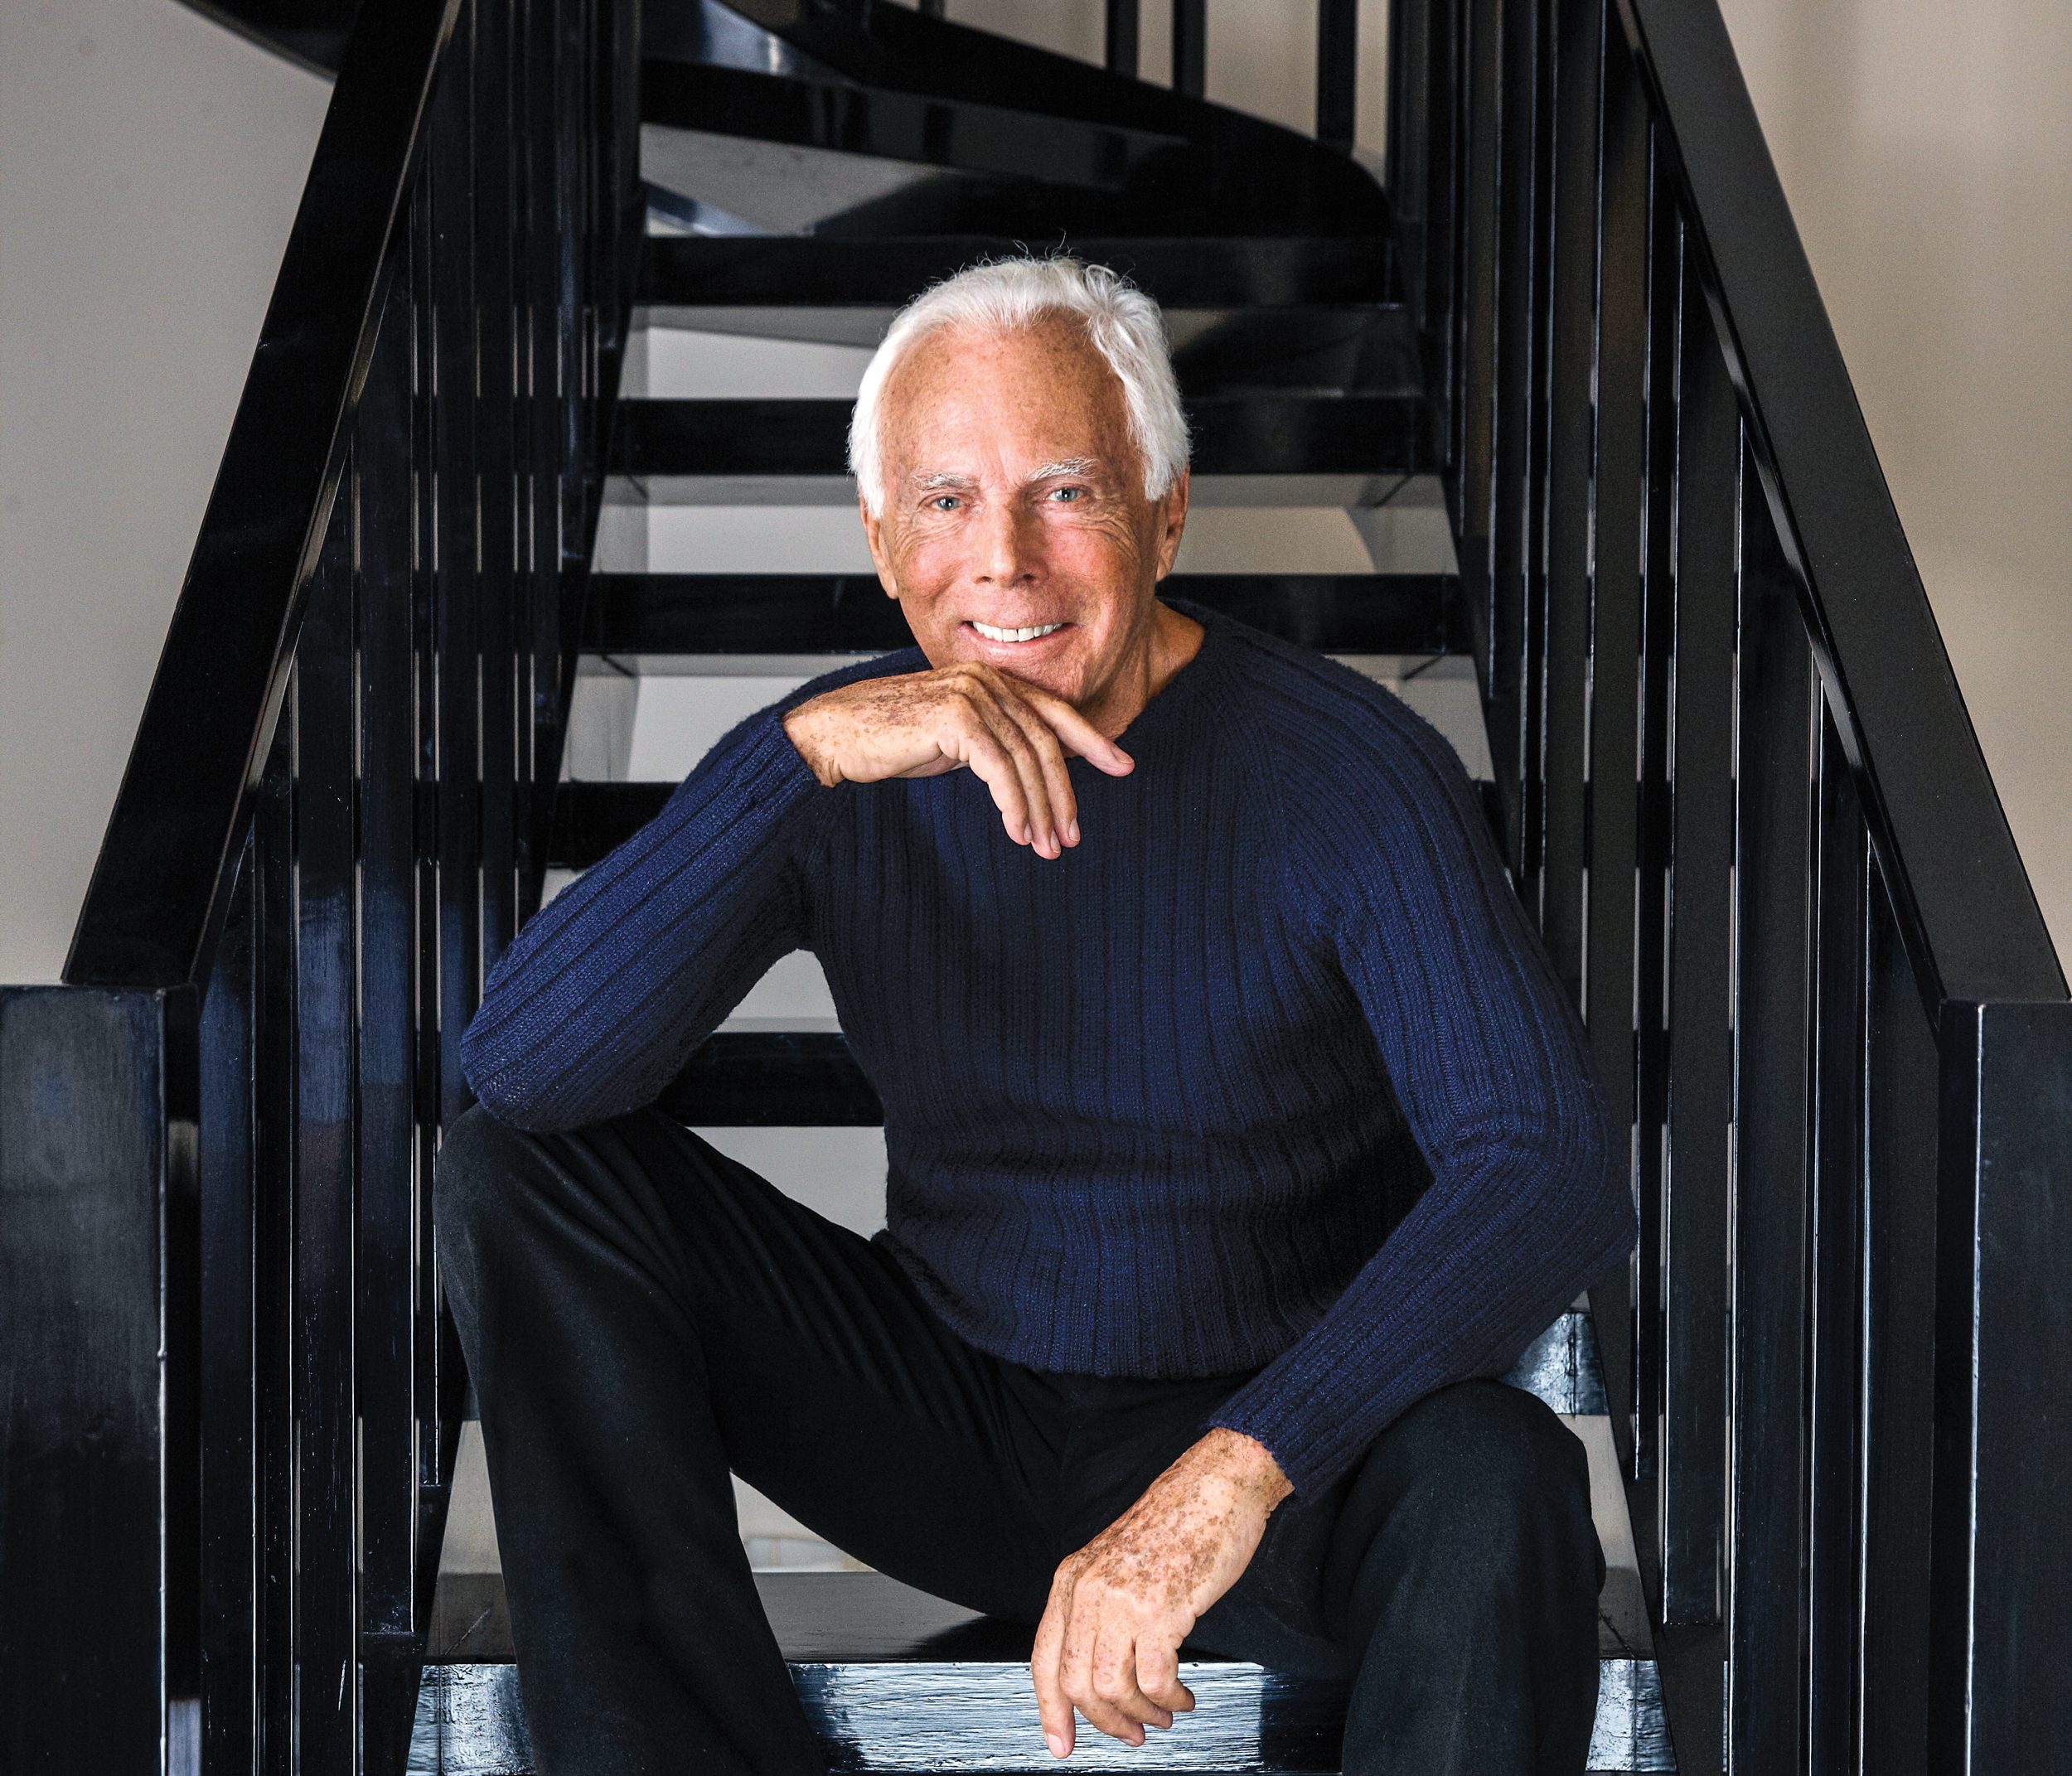 Giorgio Armani Shares the Story Behind His Prized Matisse - Galerie